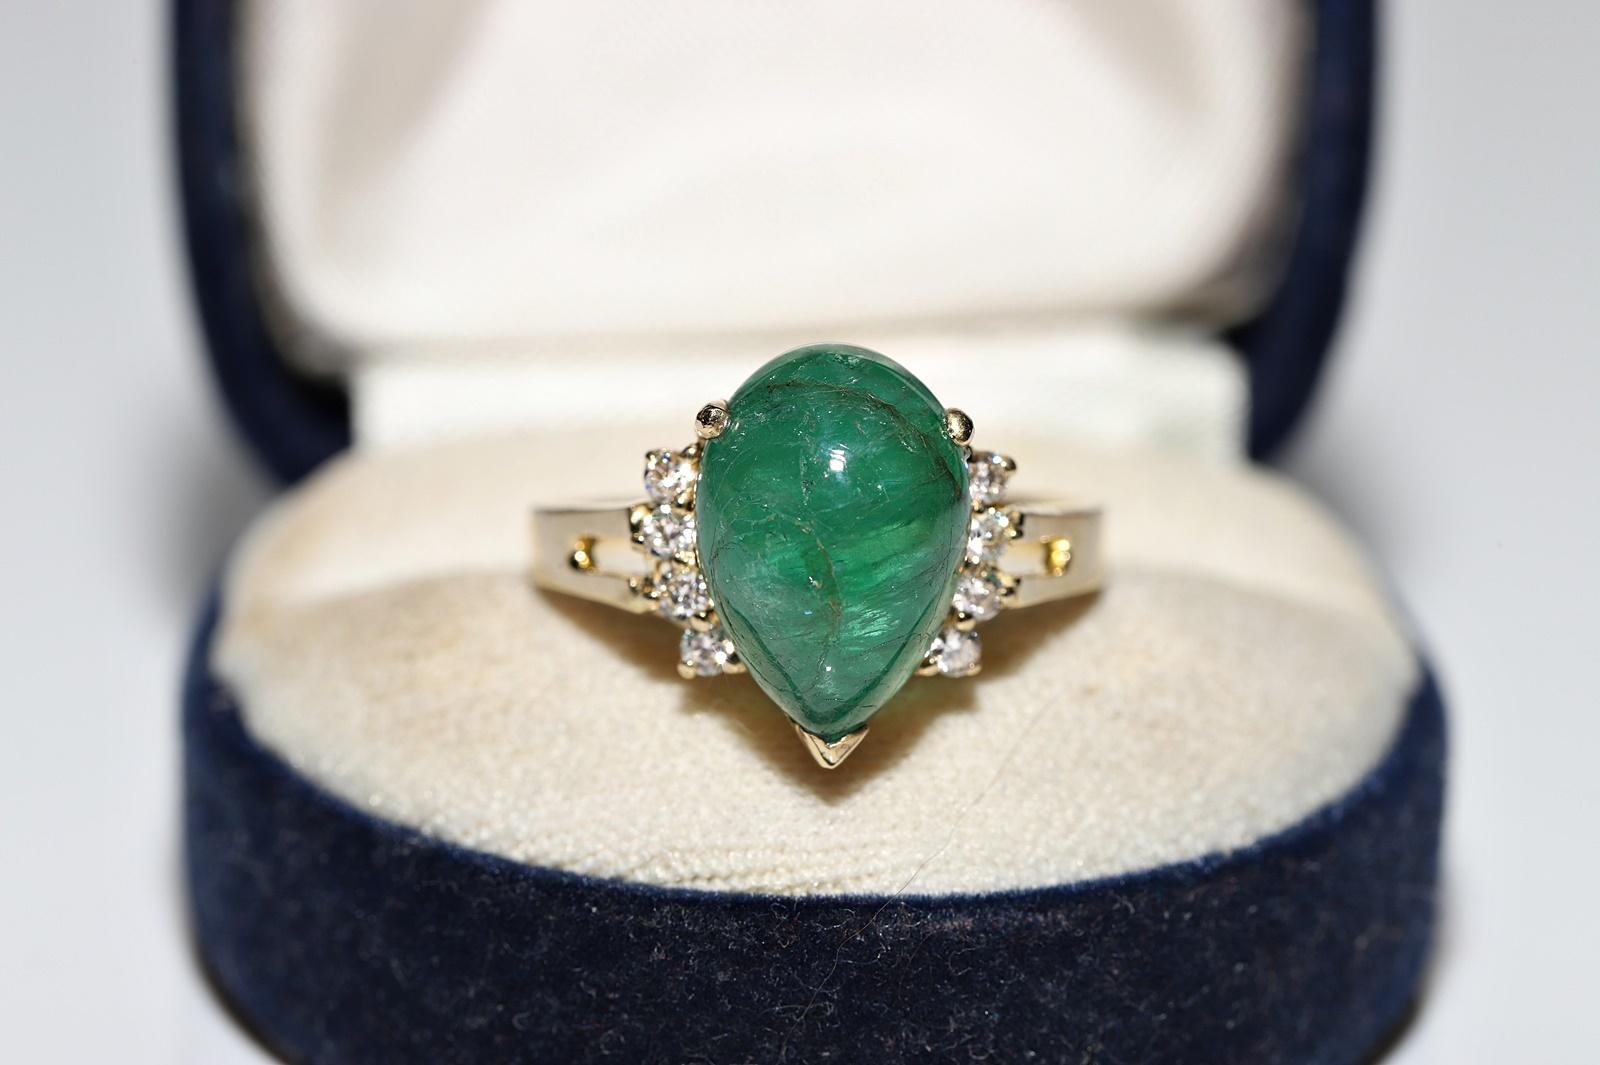 In very good condition.
Total weight is 5.1 grams.
Totally is diamond 0.25 ct.
The diamond is has G-H color and vvs-vs clarity.
Totally is emerald 6.29 ct.
There are scratches and small cracks on the emerald stone.
Ring size is US 8.7 (We offer free